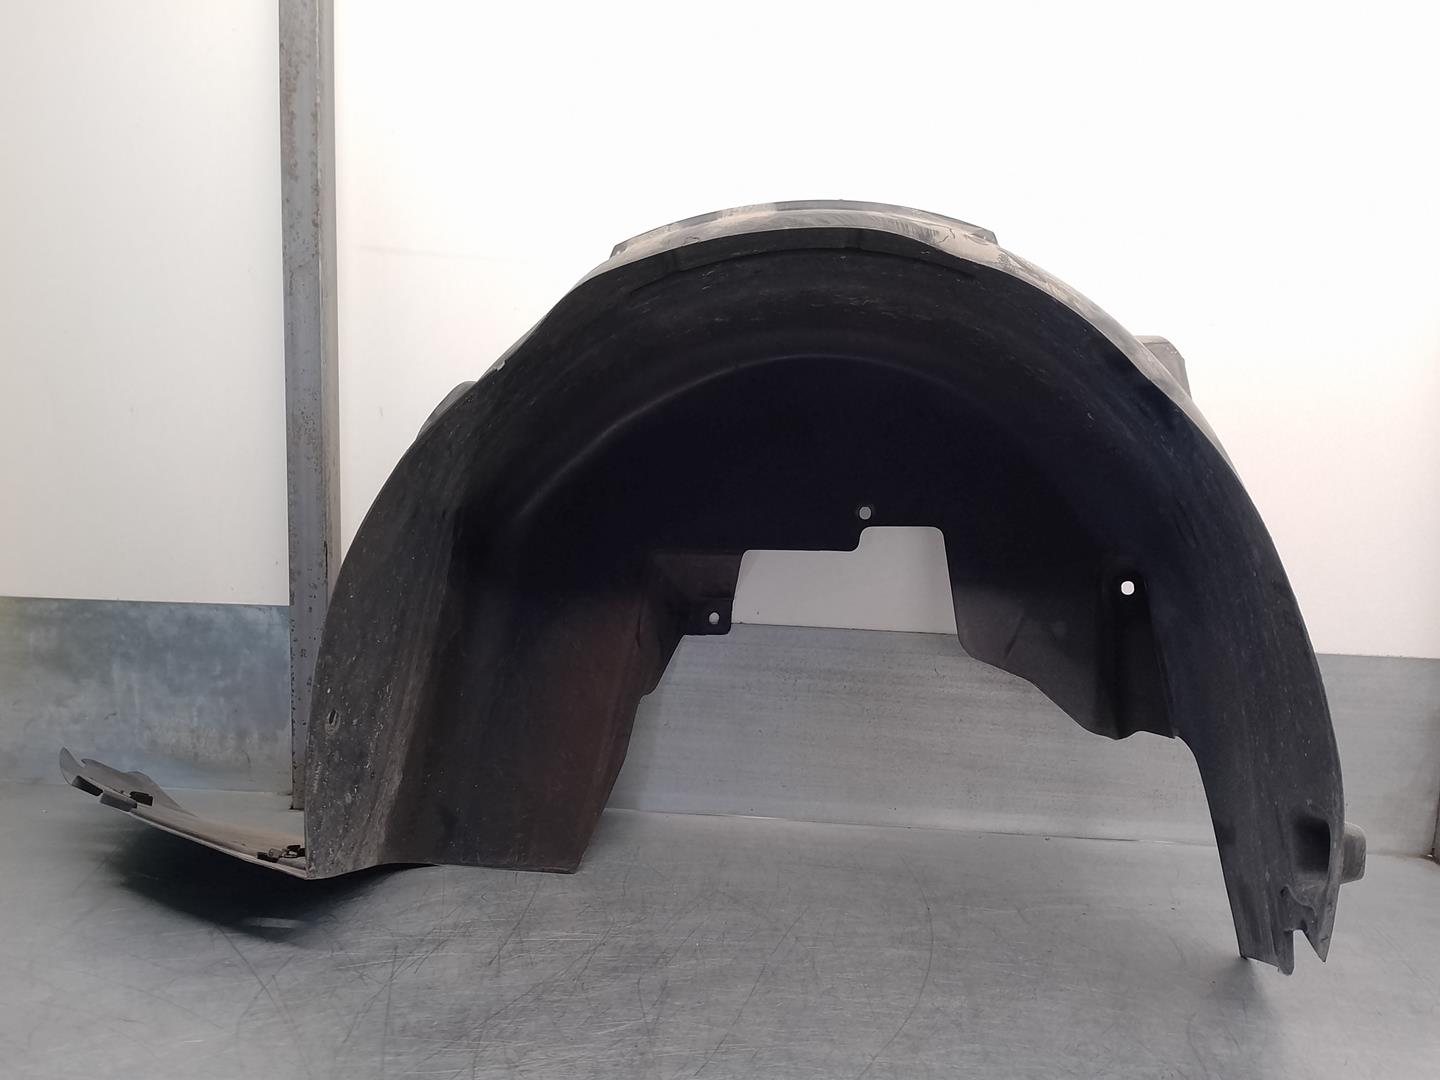 CITROËN C4 Picasso 2 generation (2013-2018) Rear Right Arch Liner 9808022980, CESTA-13C 21732789